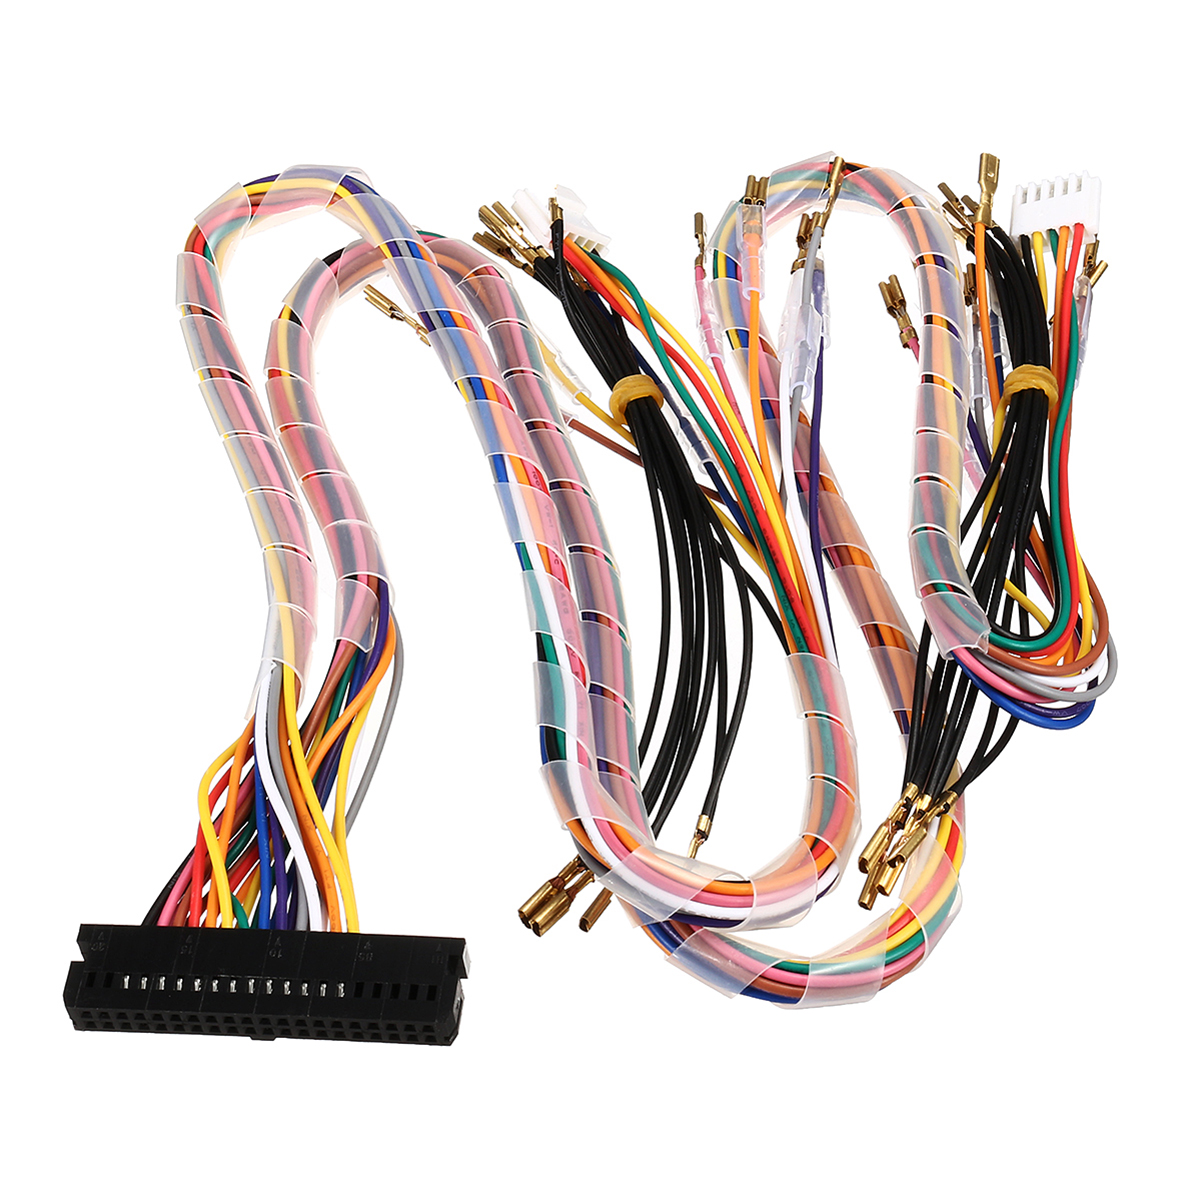 

Wiring Harness Cable Replacement Parts Assemble For Arcade Jamma Board Machine Game Console